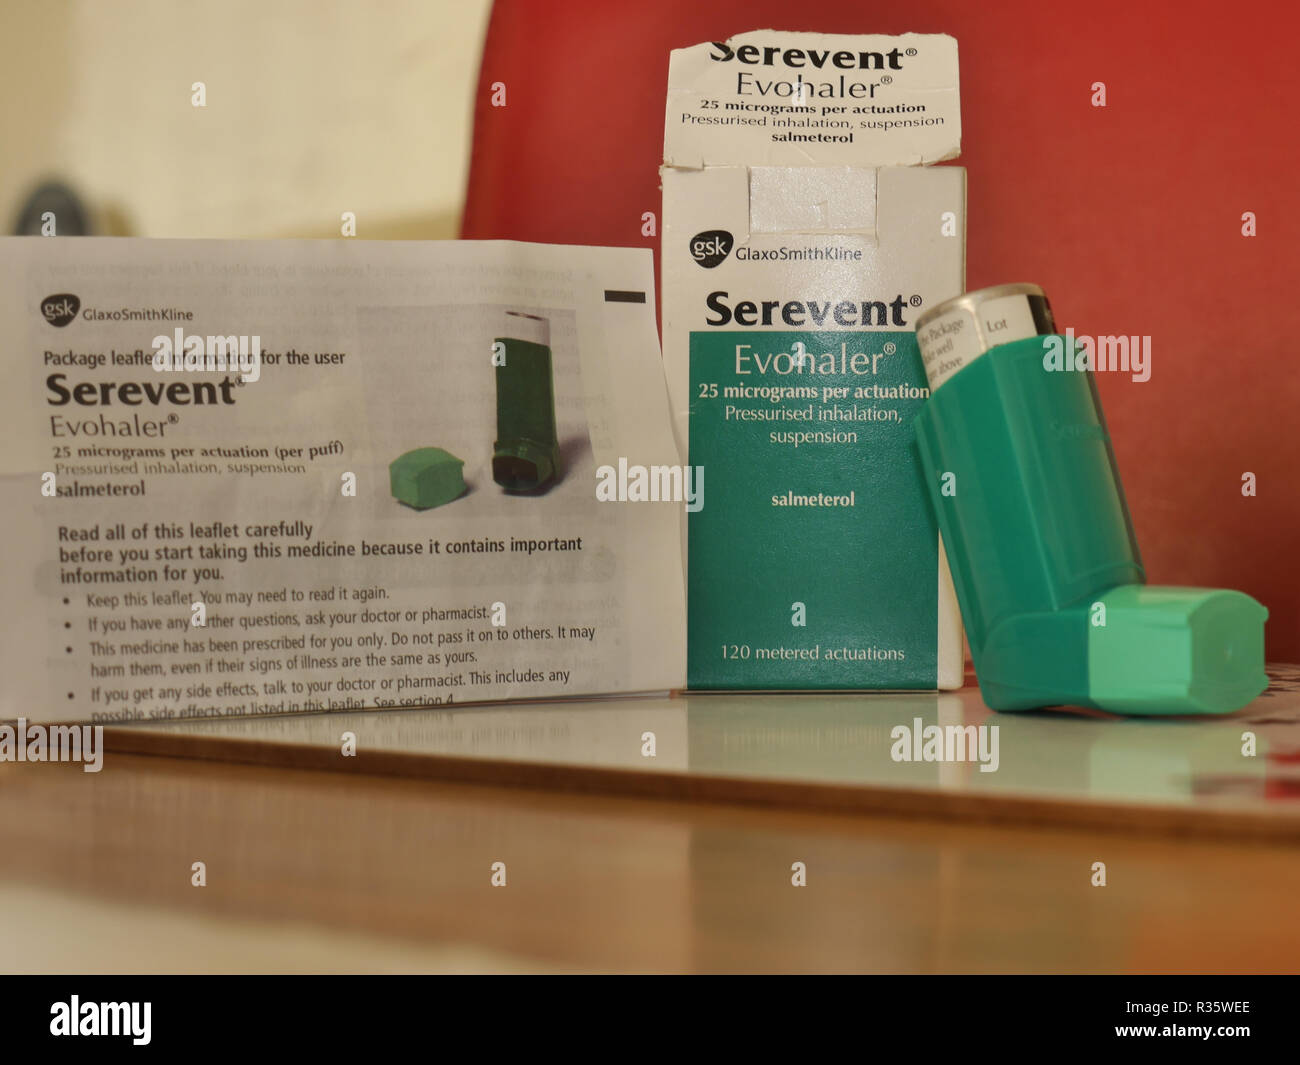 Serevent(r) inhaler. Shot shows box, instruction leaflet and evohaler containing salmeterol for asthma and copd relief,Long lasting. Stock Photo